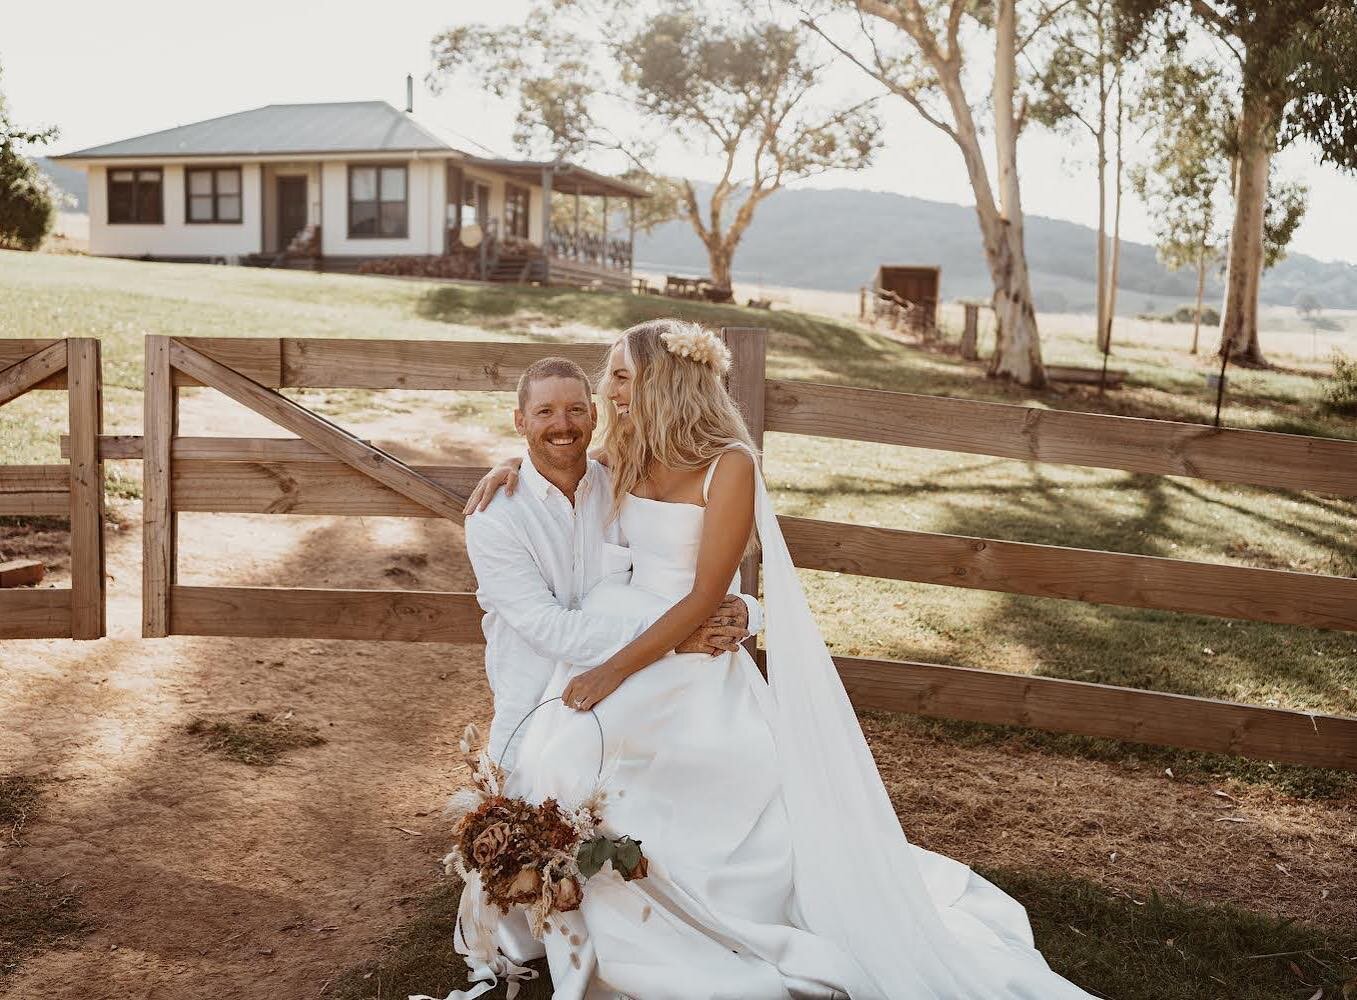 Sarah and Rhys💗
.
So grateful the stars aligned and I got to help these two get married earlier in the year. They had a very intimate ceremony at the stunning @hotel_granya and it was full of plenty of laughs and tears.
See their review below 🥰👇
.